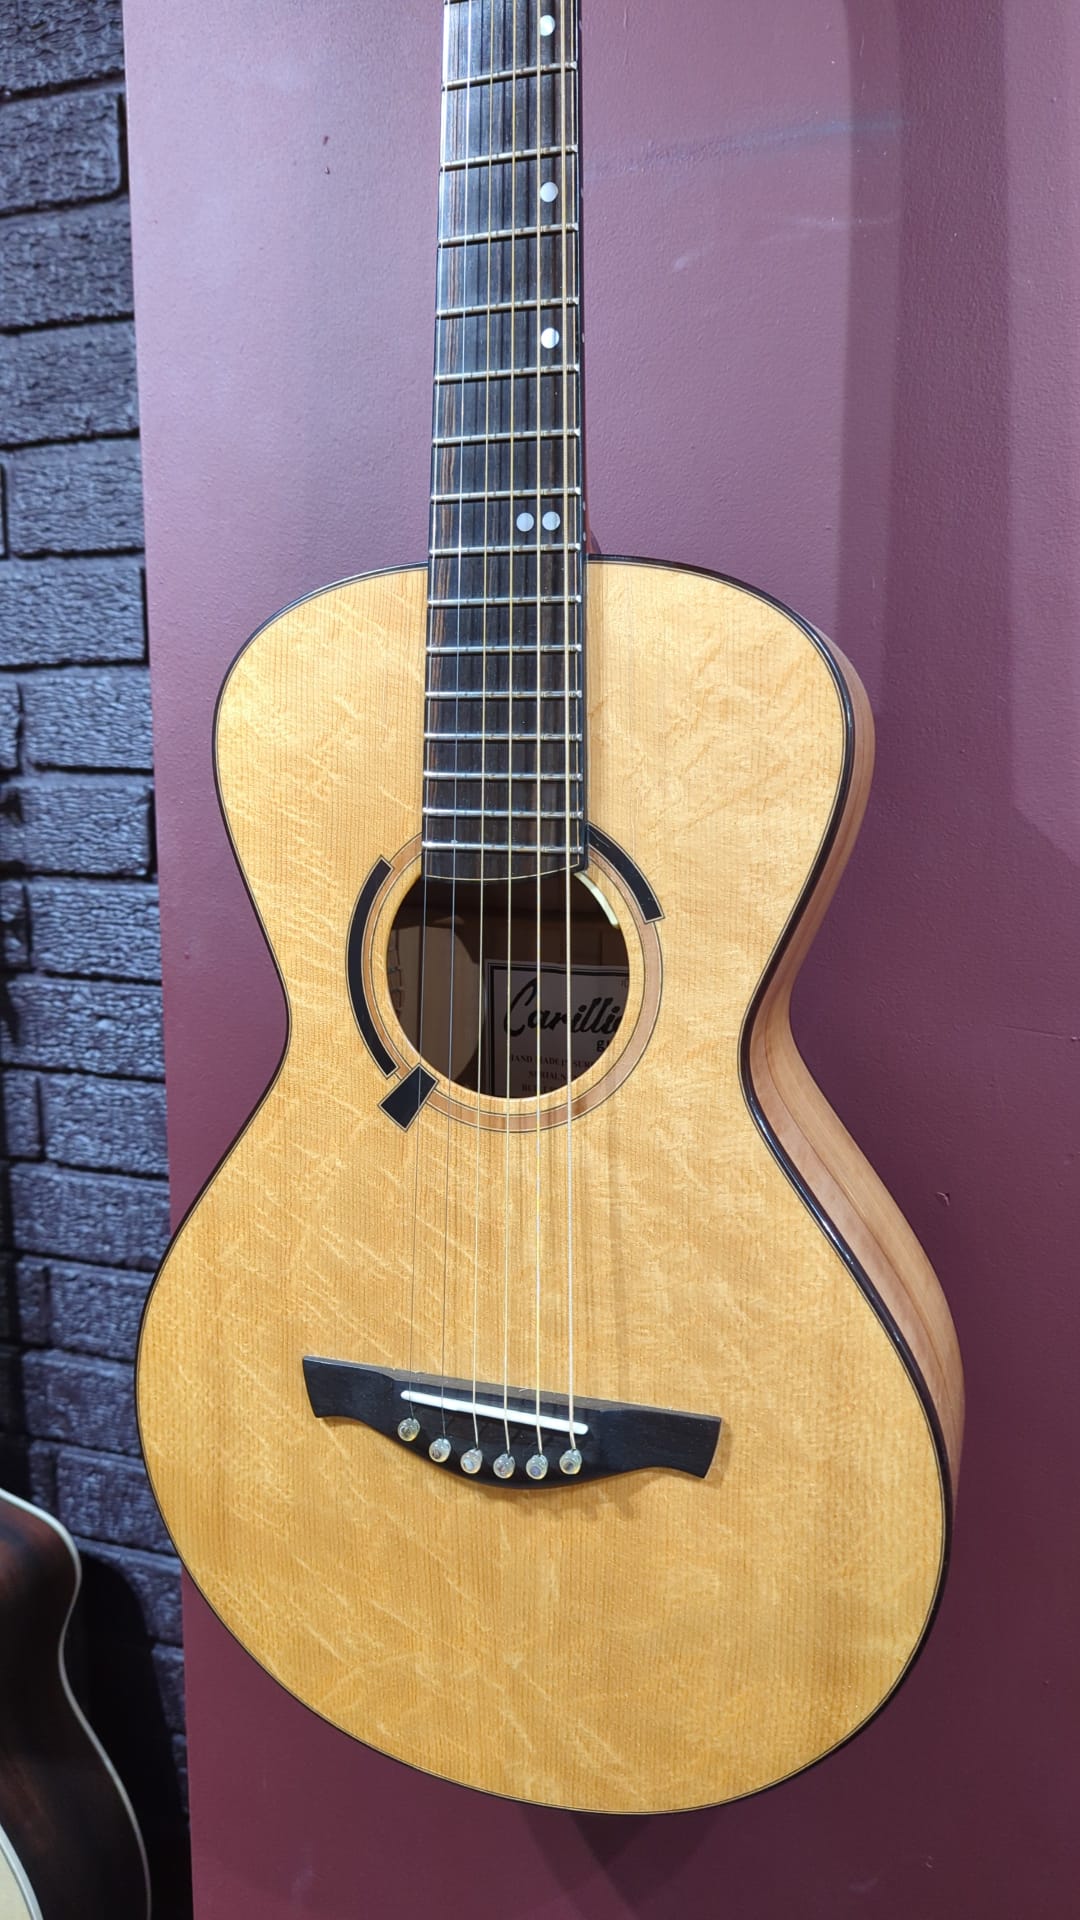 Carillion parlor left handed (used), Acoustic Guitar for sale at Richards Guitars.